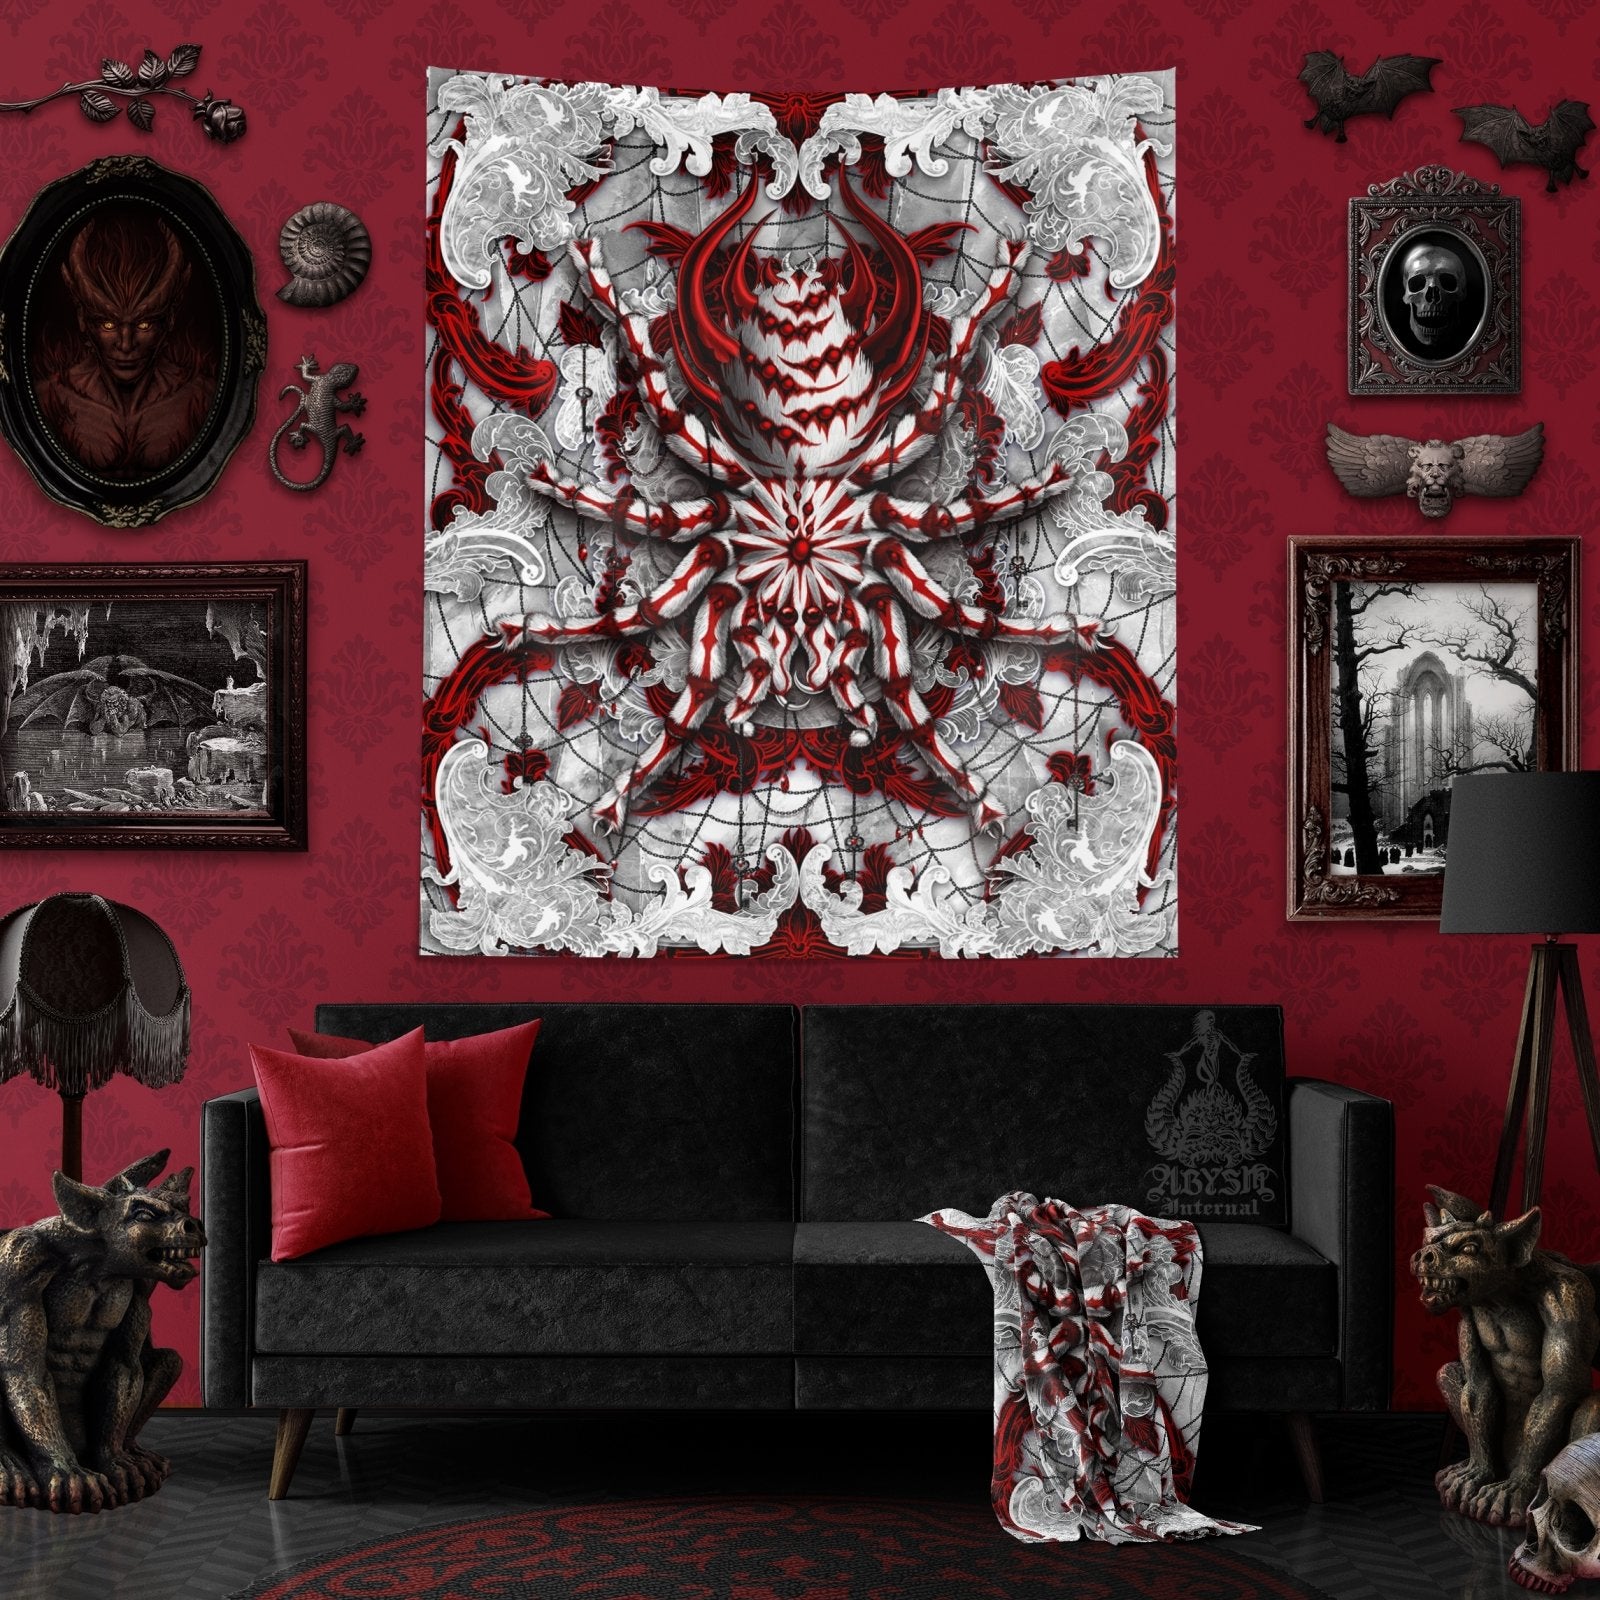 Bloody White Goth Tapestry, Spider Wall Hanging, Gothic Home Decor, Tarantula Art Print - Abysm Internal